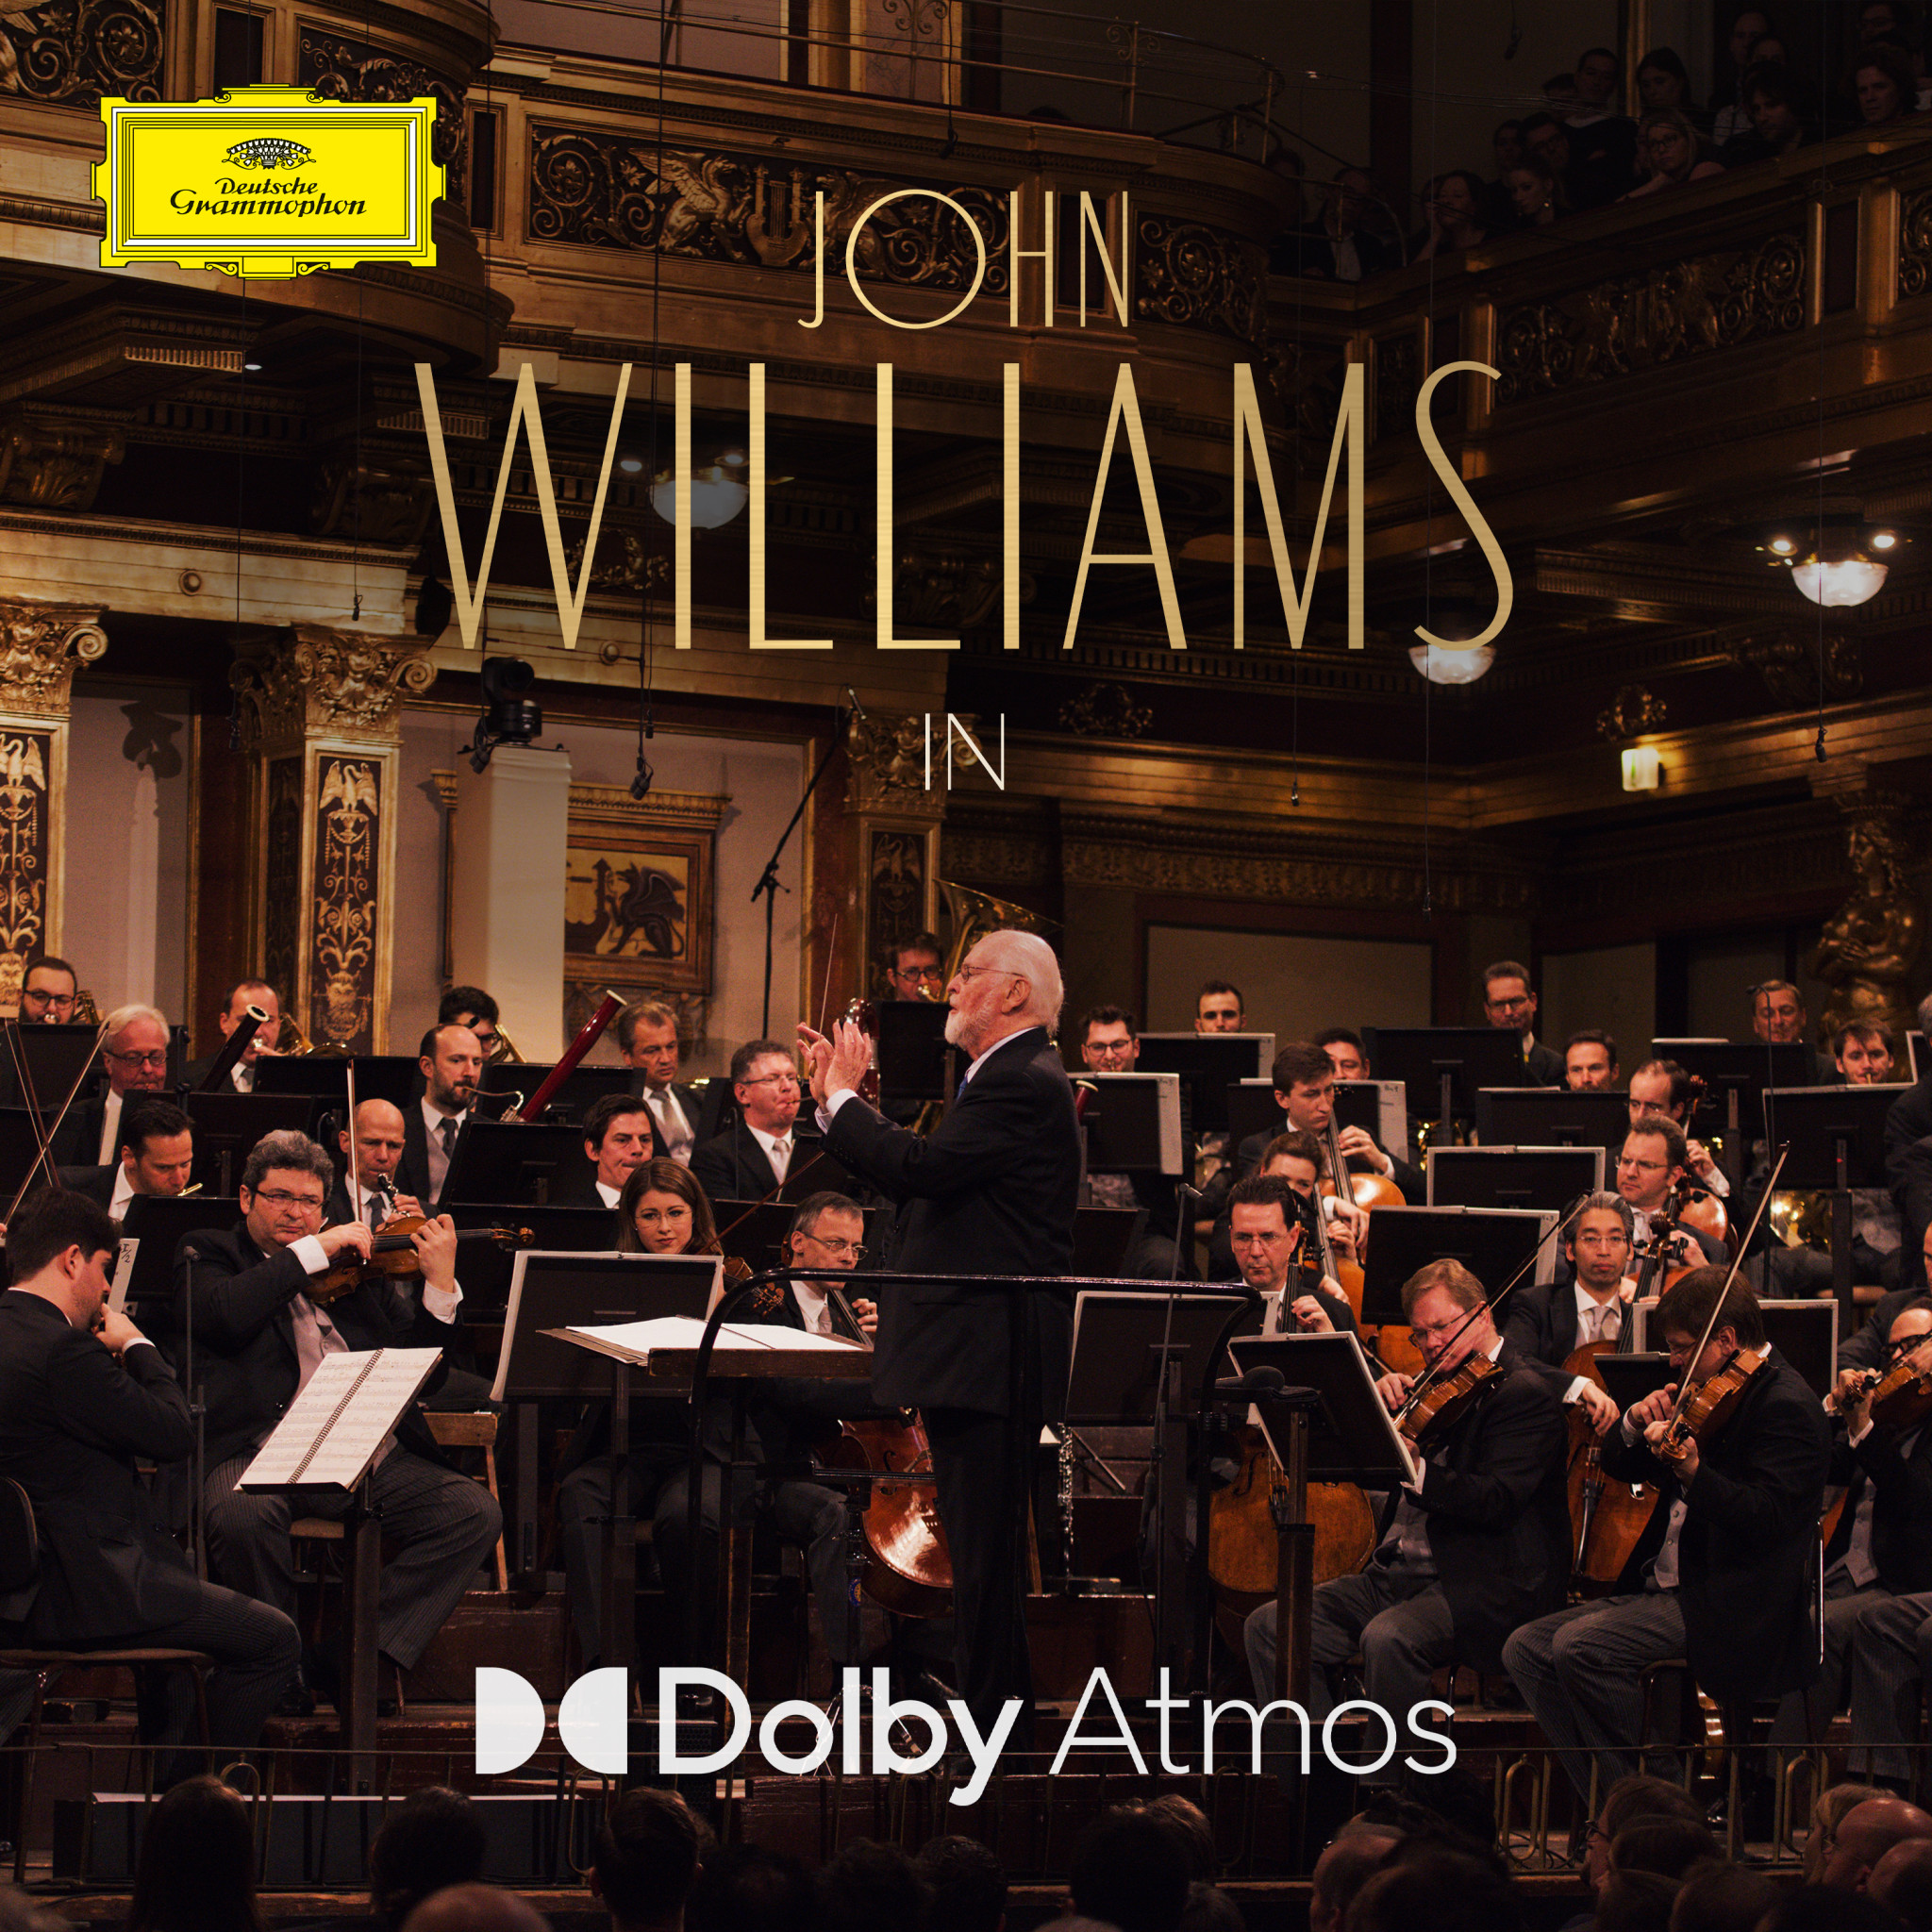 John Williams in Dolby Atmos